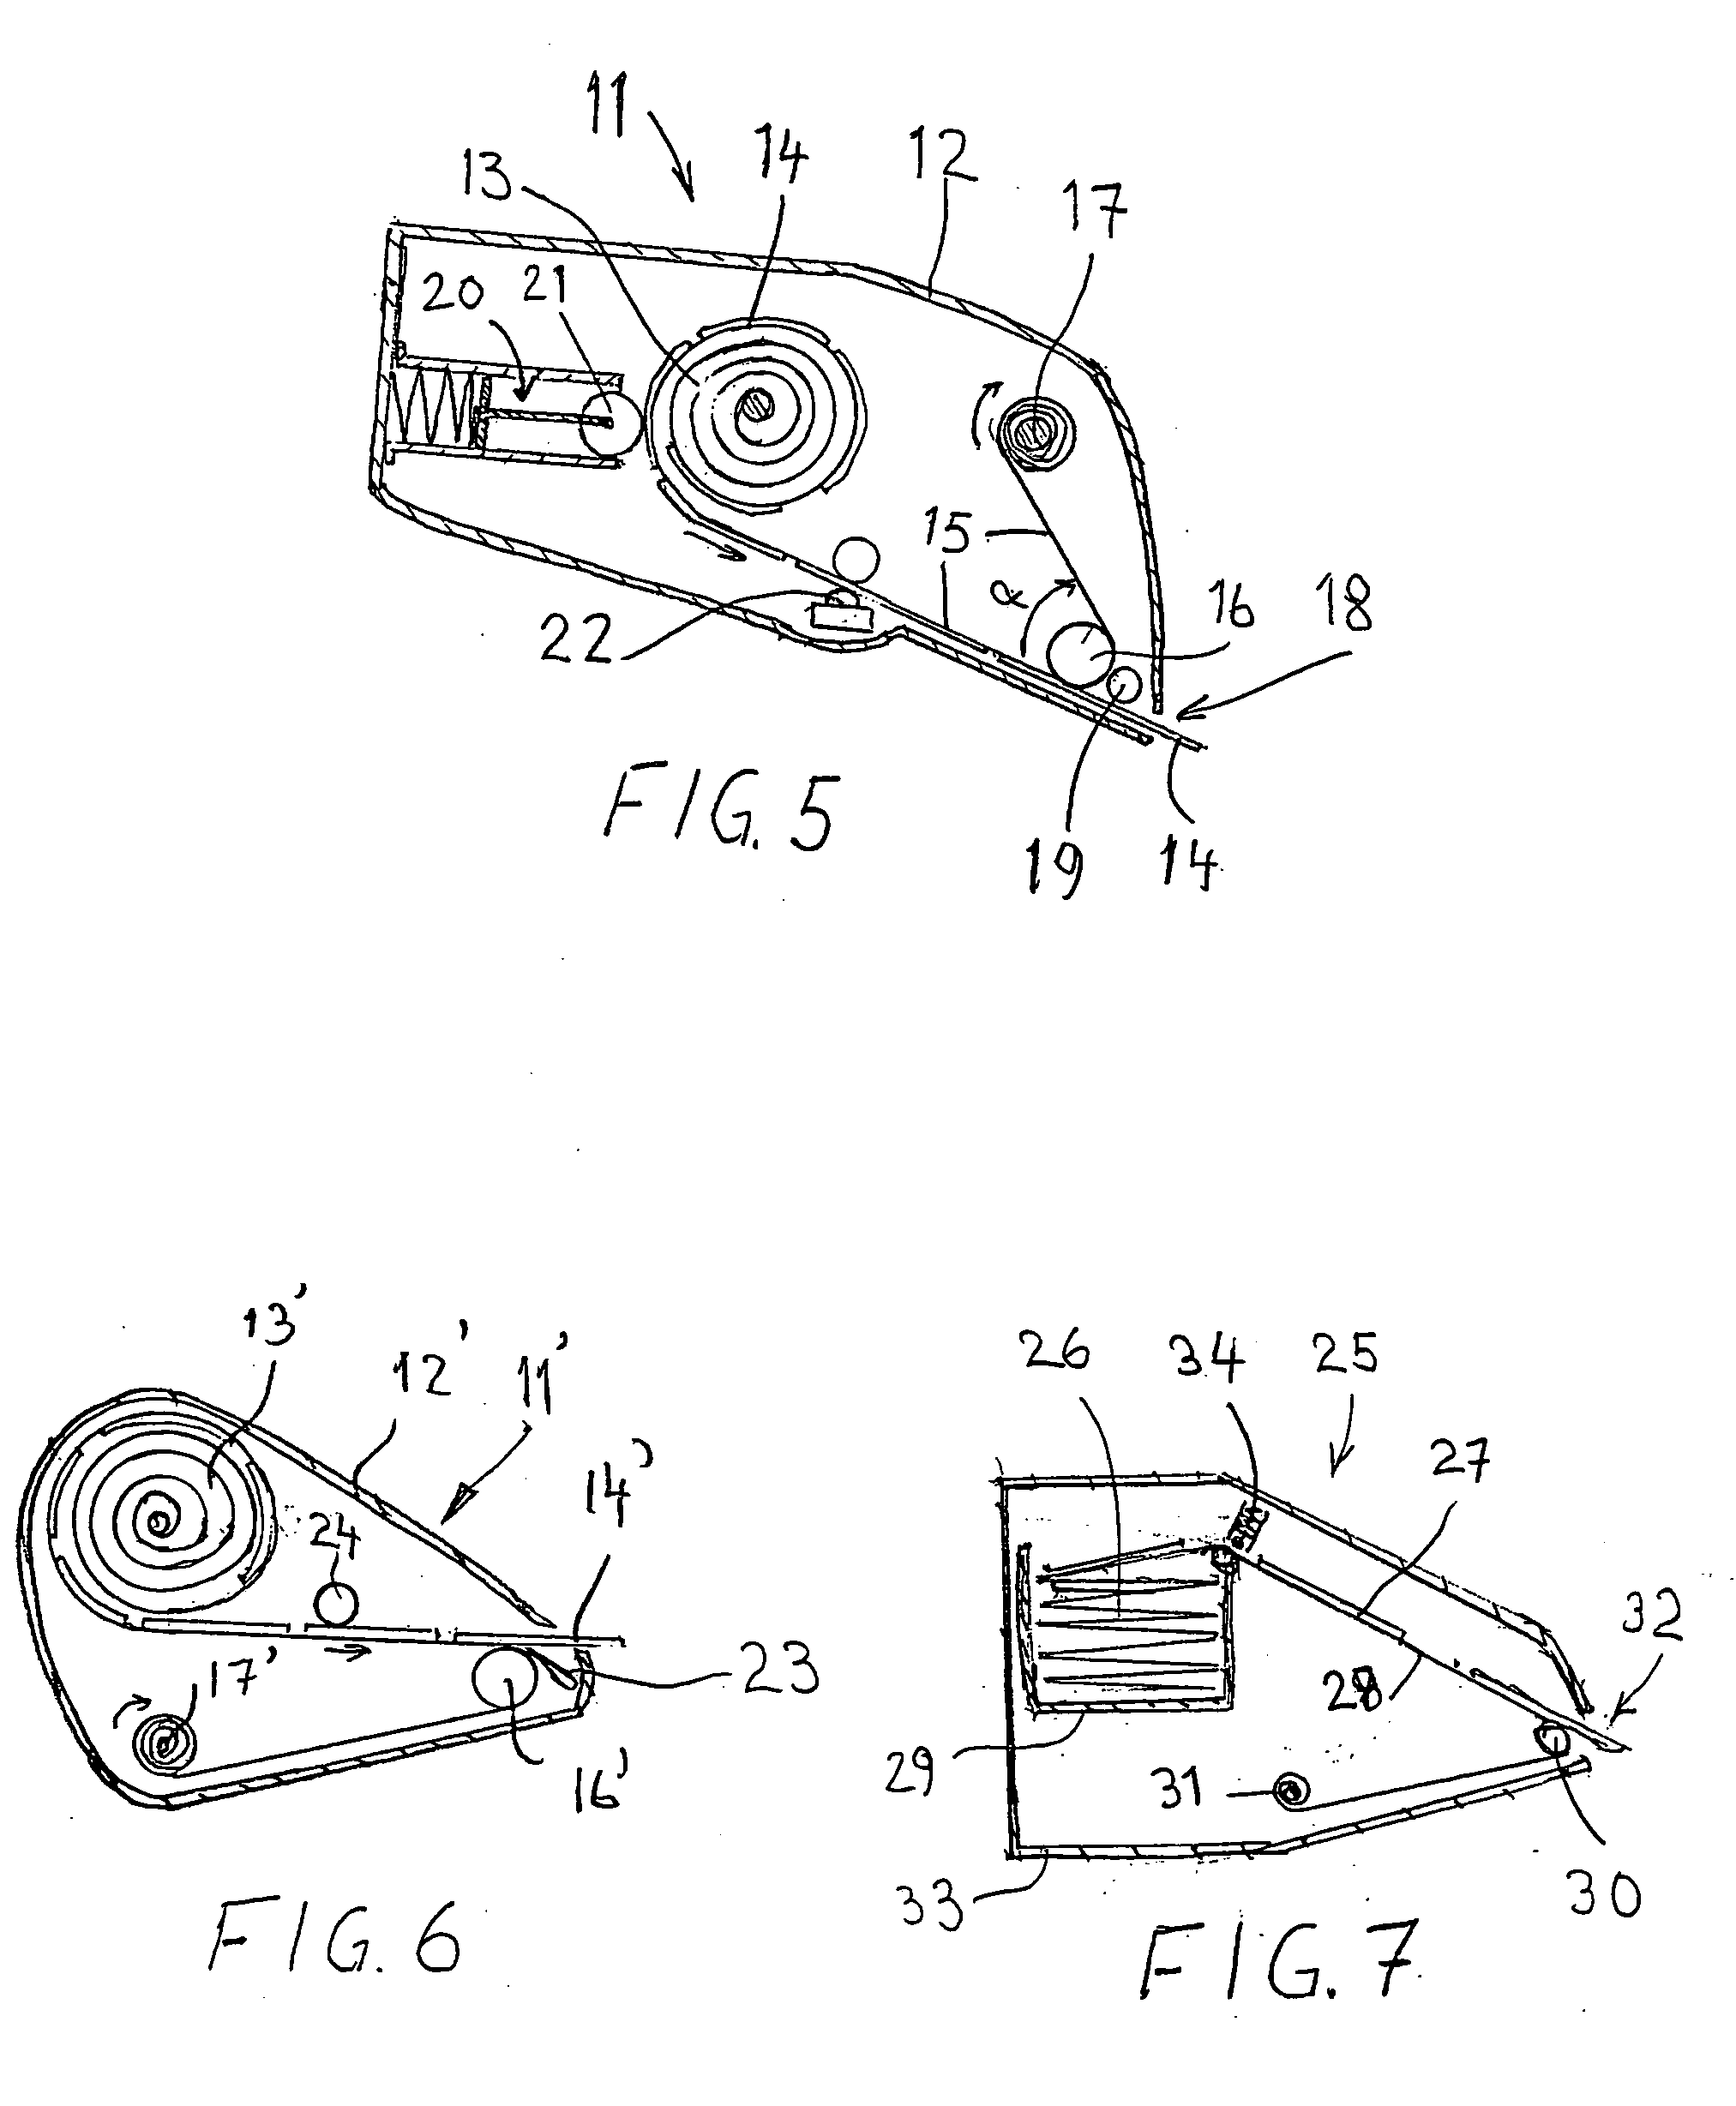 Dispenser and roll for absorbent articles